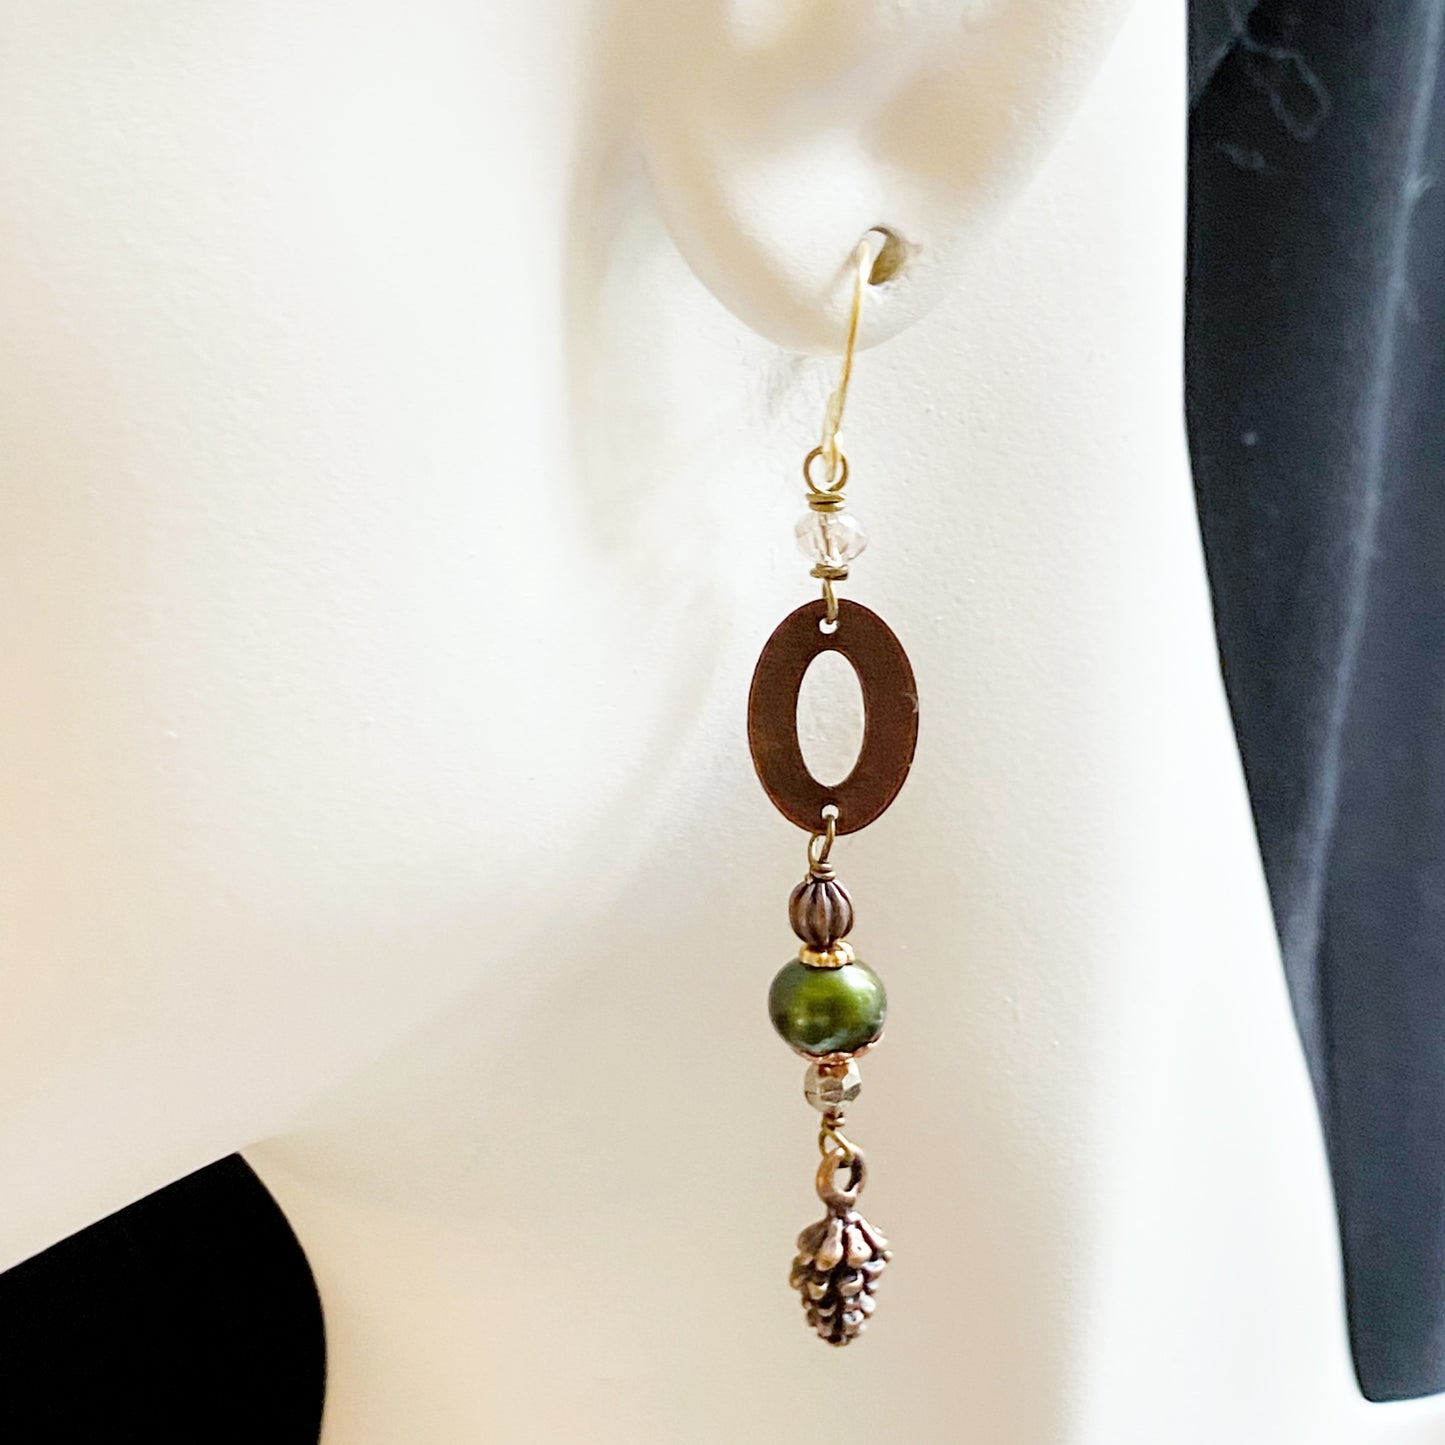 Green rhyolite and garnet necklace and earring set